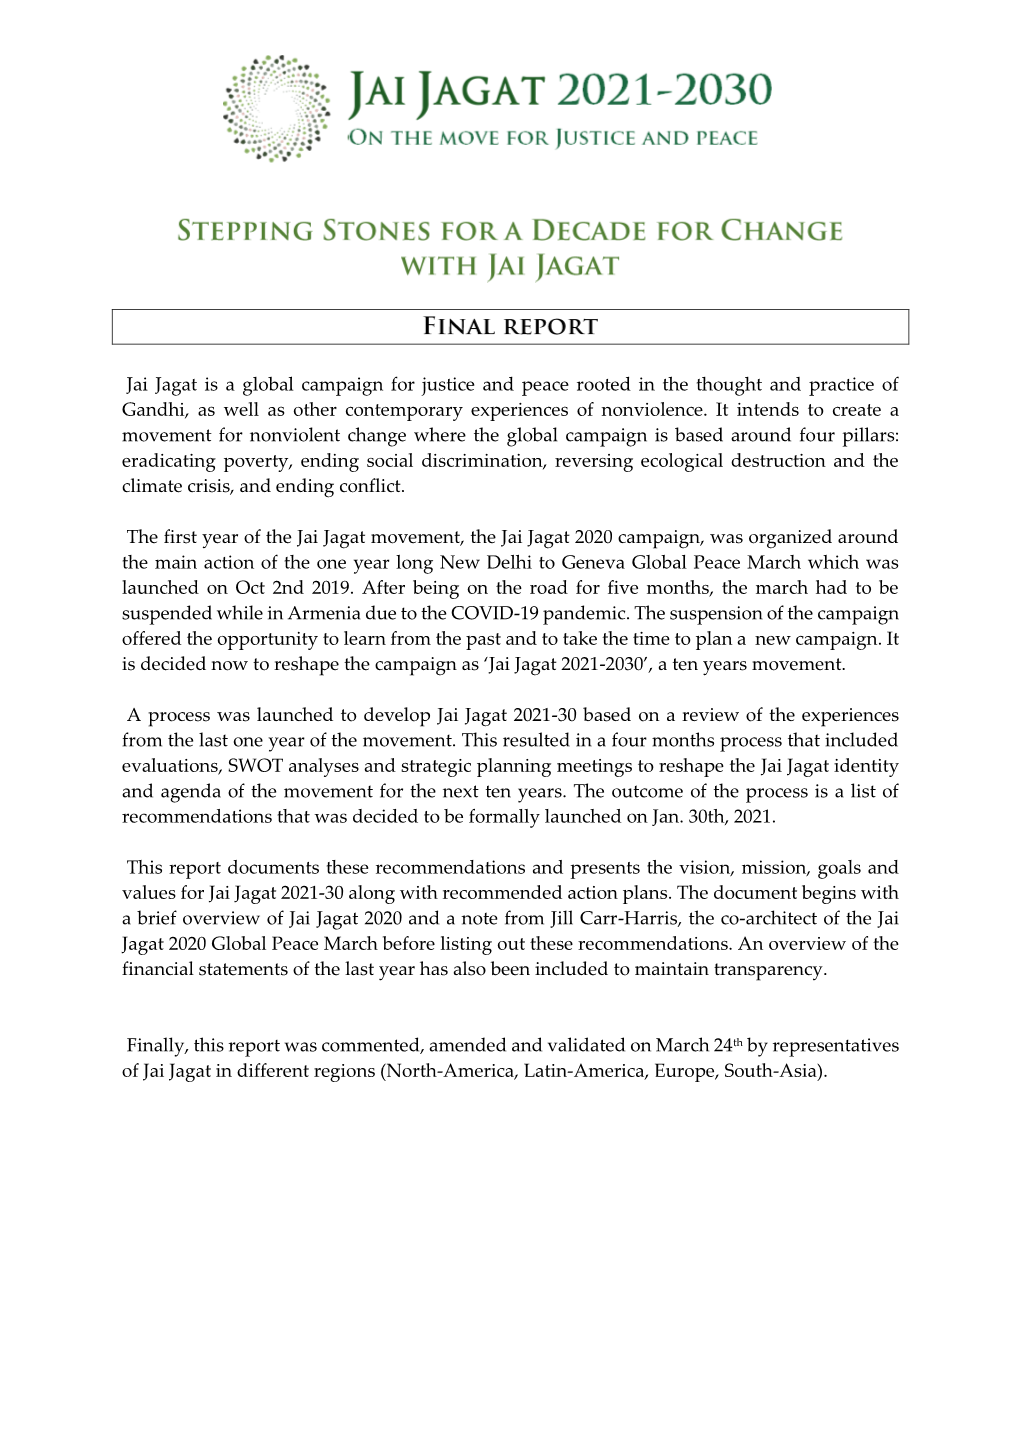 Stepping Stones for a Decade for Change [...]